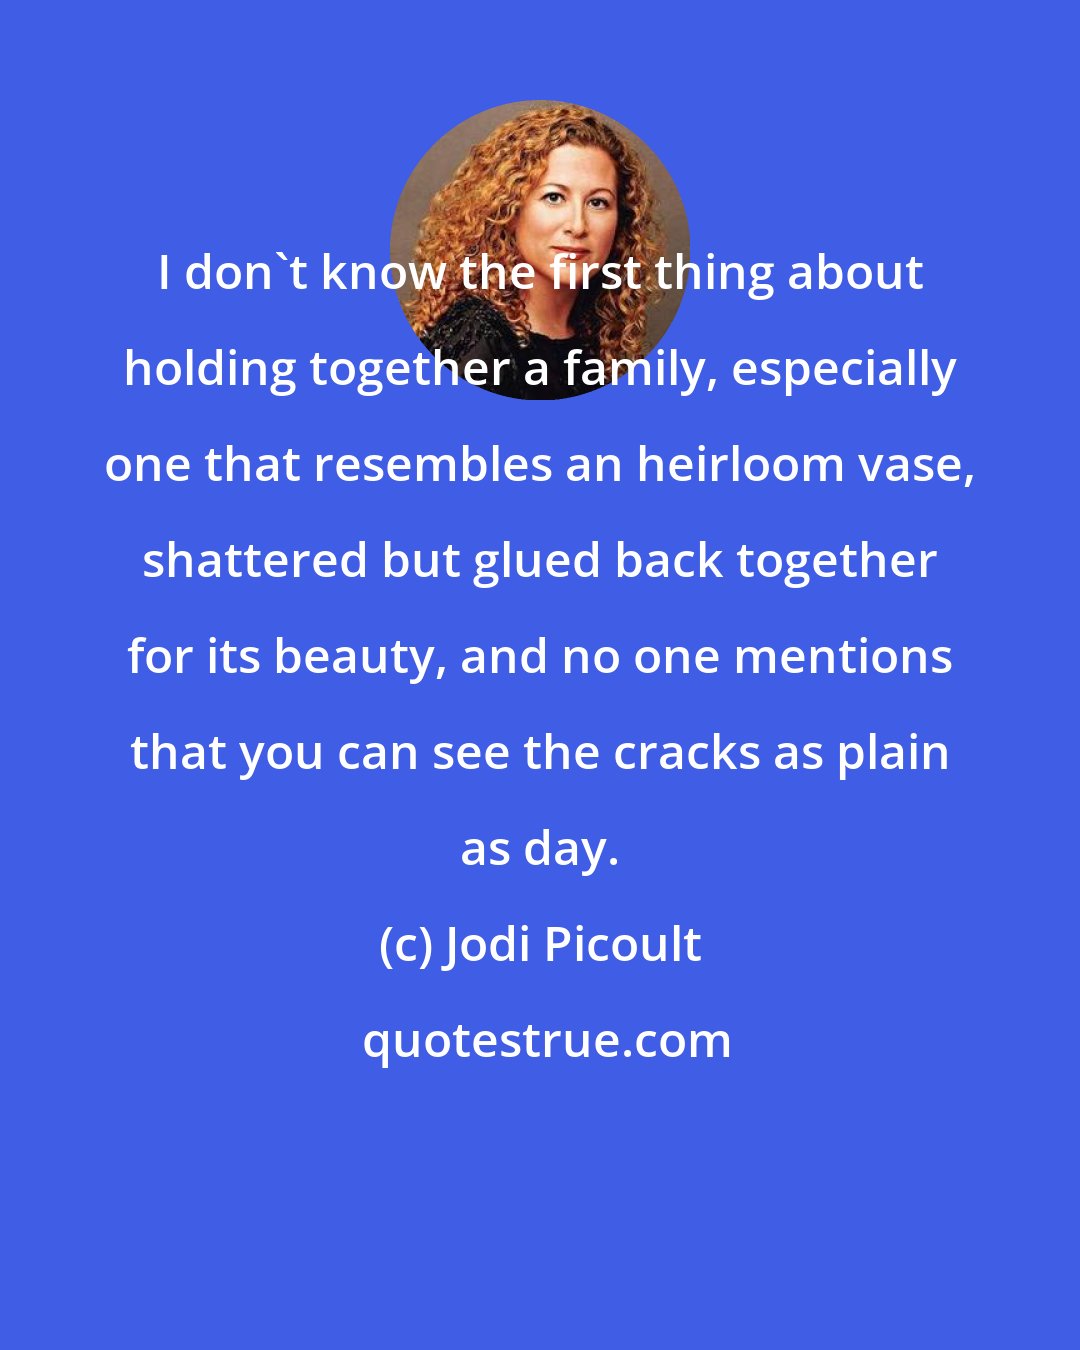 Jodi Picoult: I don't know the first thing about holding together a family, especially one that resembles an heirloom vase, shattered but glued back together for its beauty, and no one mentions that you can see the cracks as plain as day.